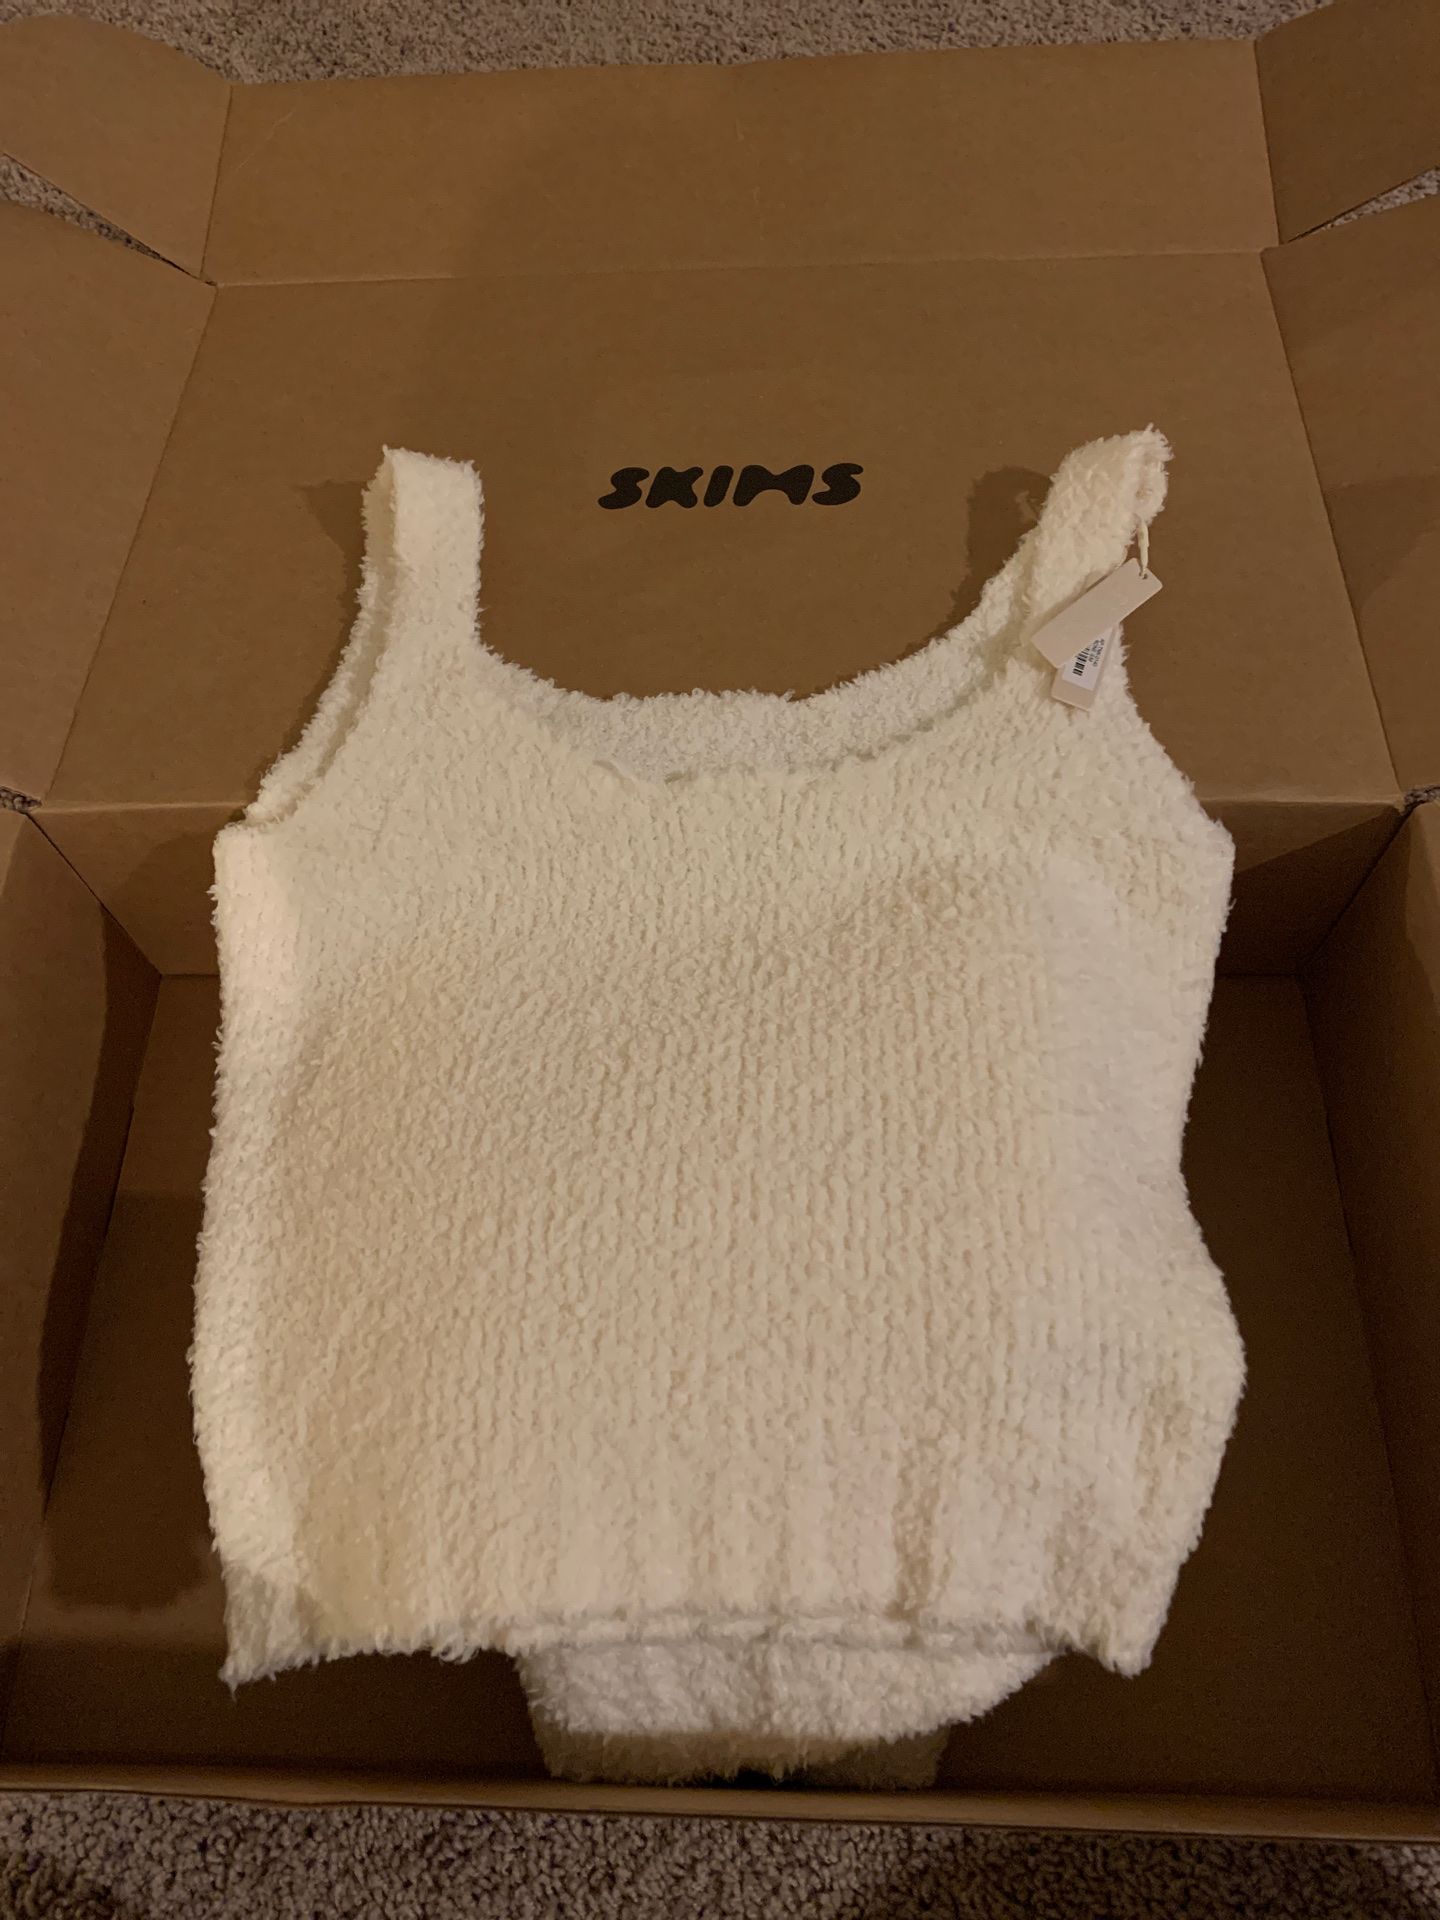 Skims Cozy Knit Tank (Grey) Large for Sale in Sacramento, CA - OfferUp